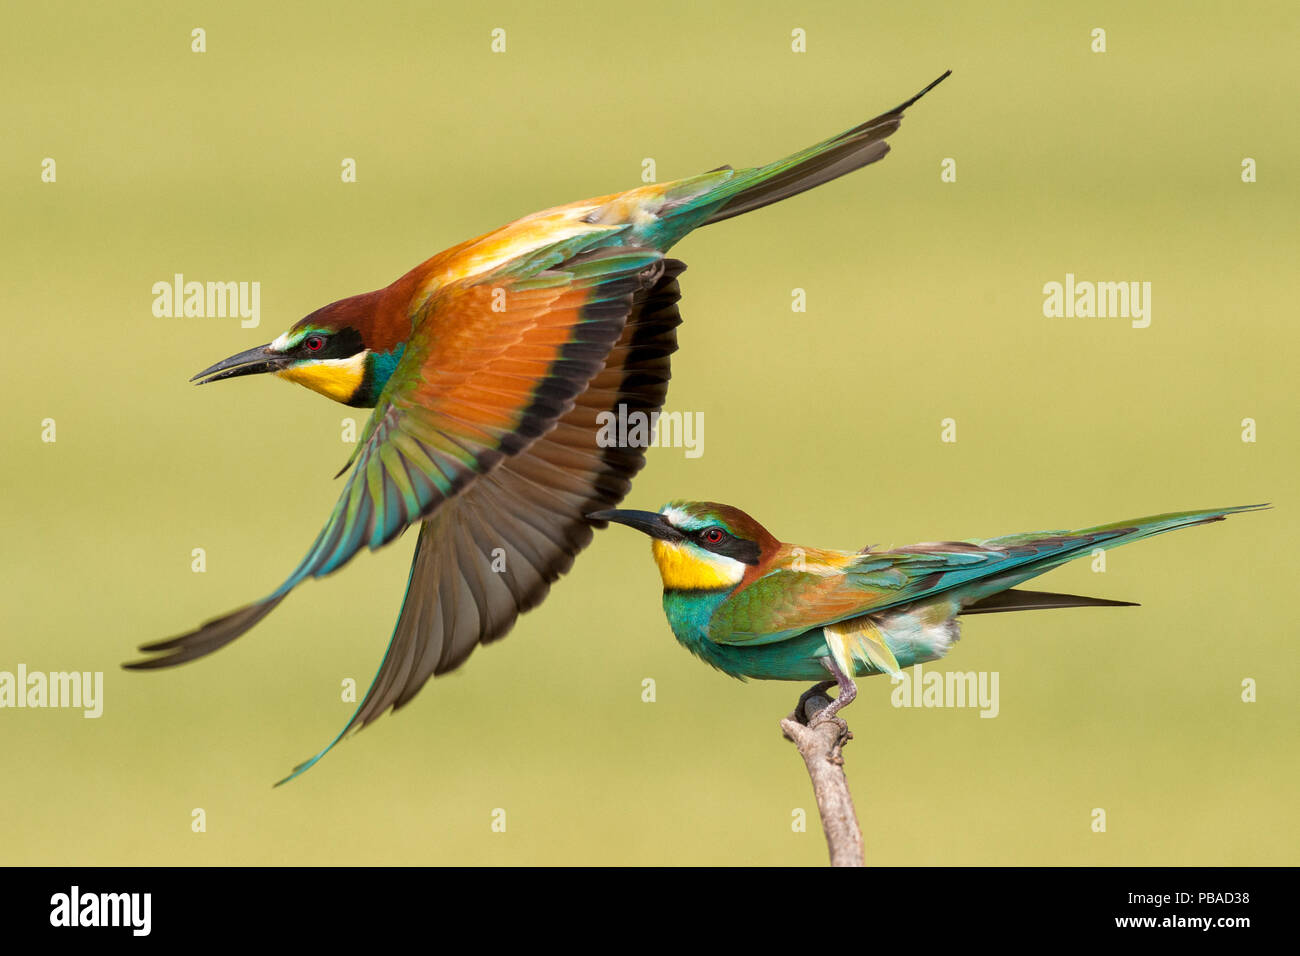 European bee eaters (Merops apiaster) one taking off another perched, Kiskunsagi National Park, Pusztaszer, Hungary. May. Stock Photo